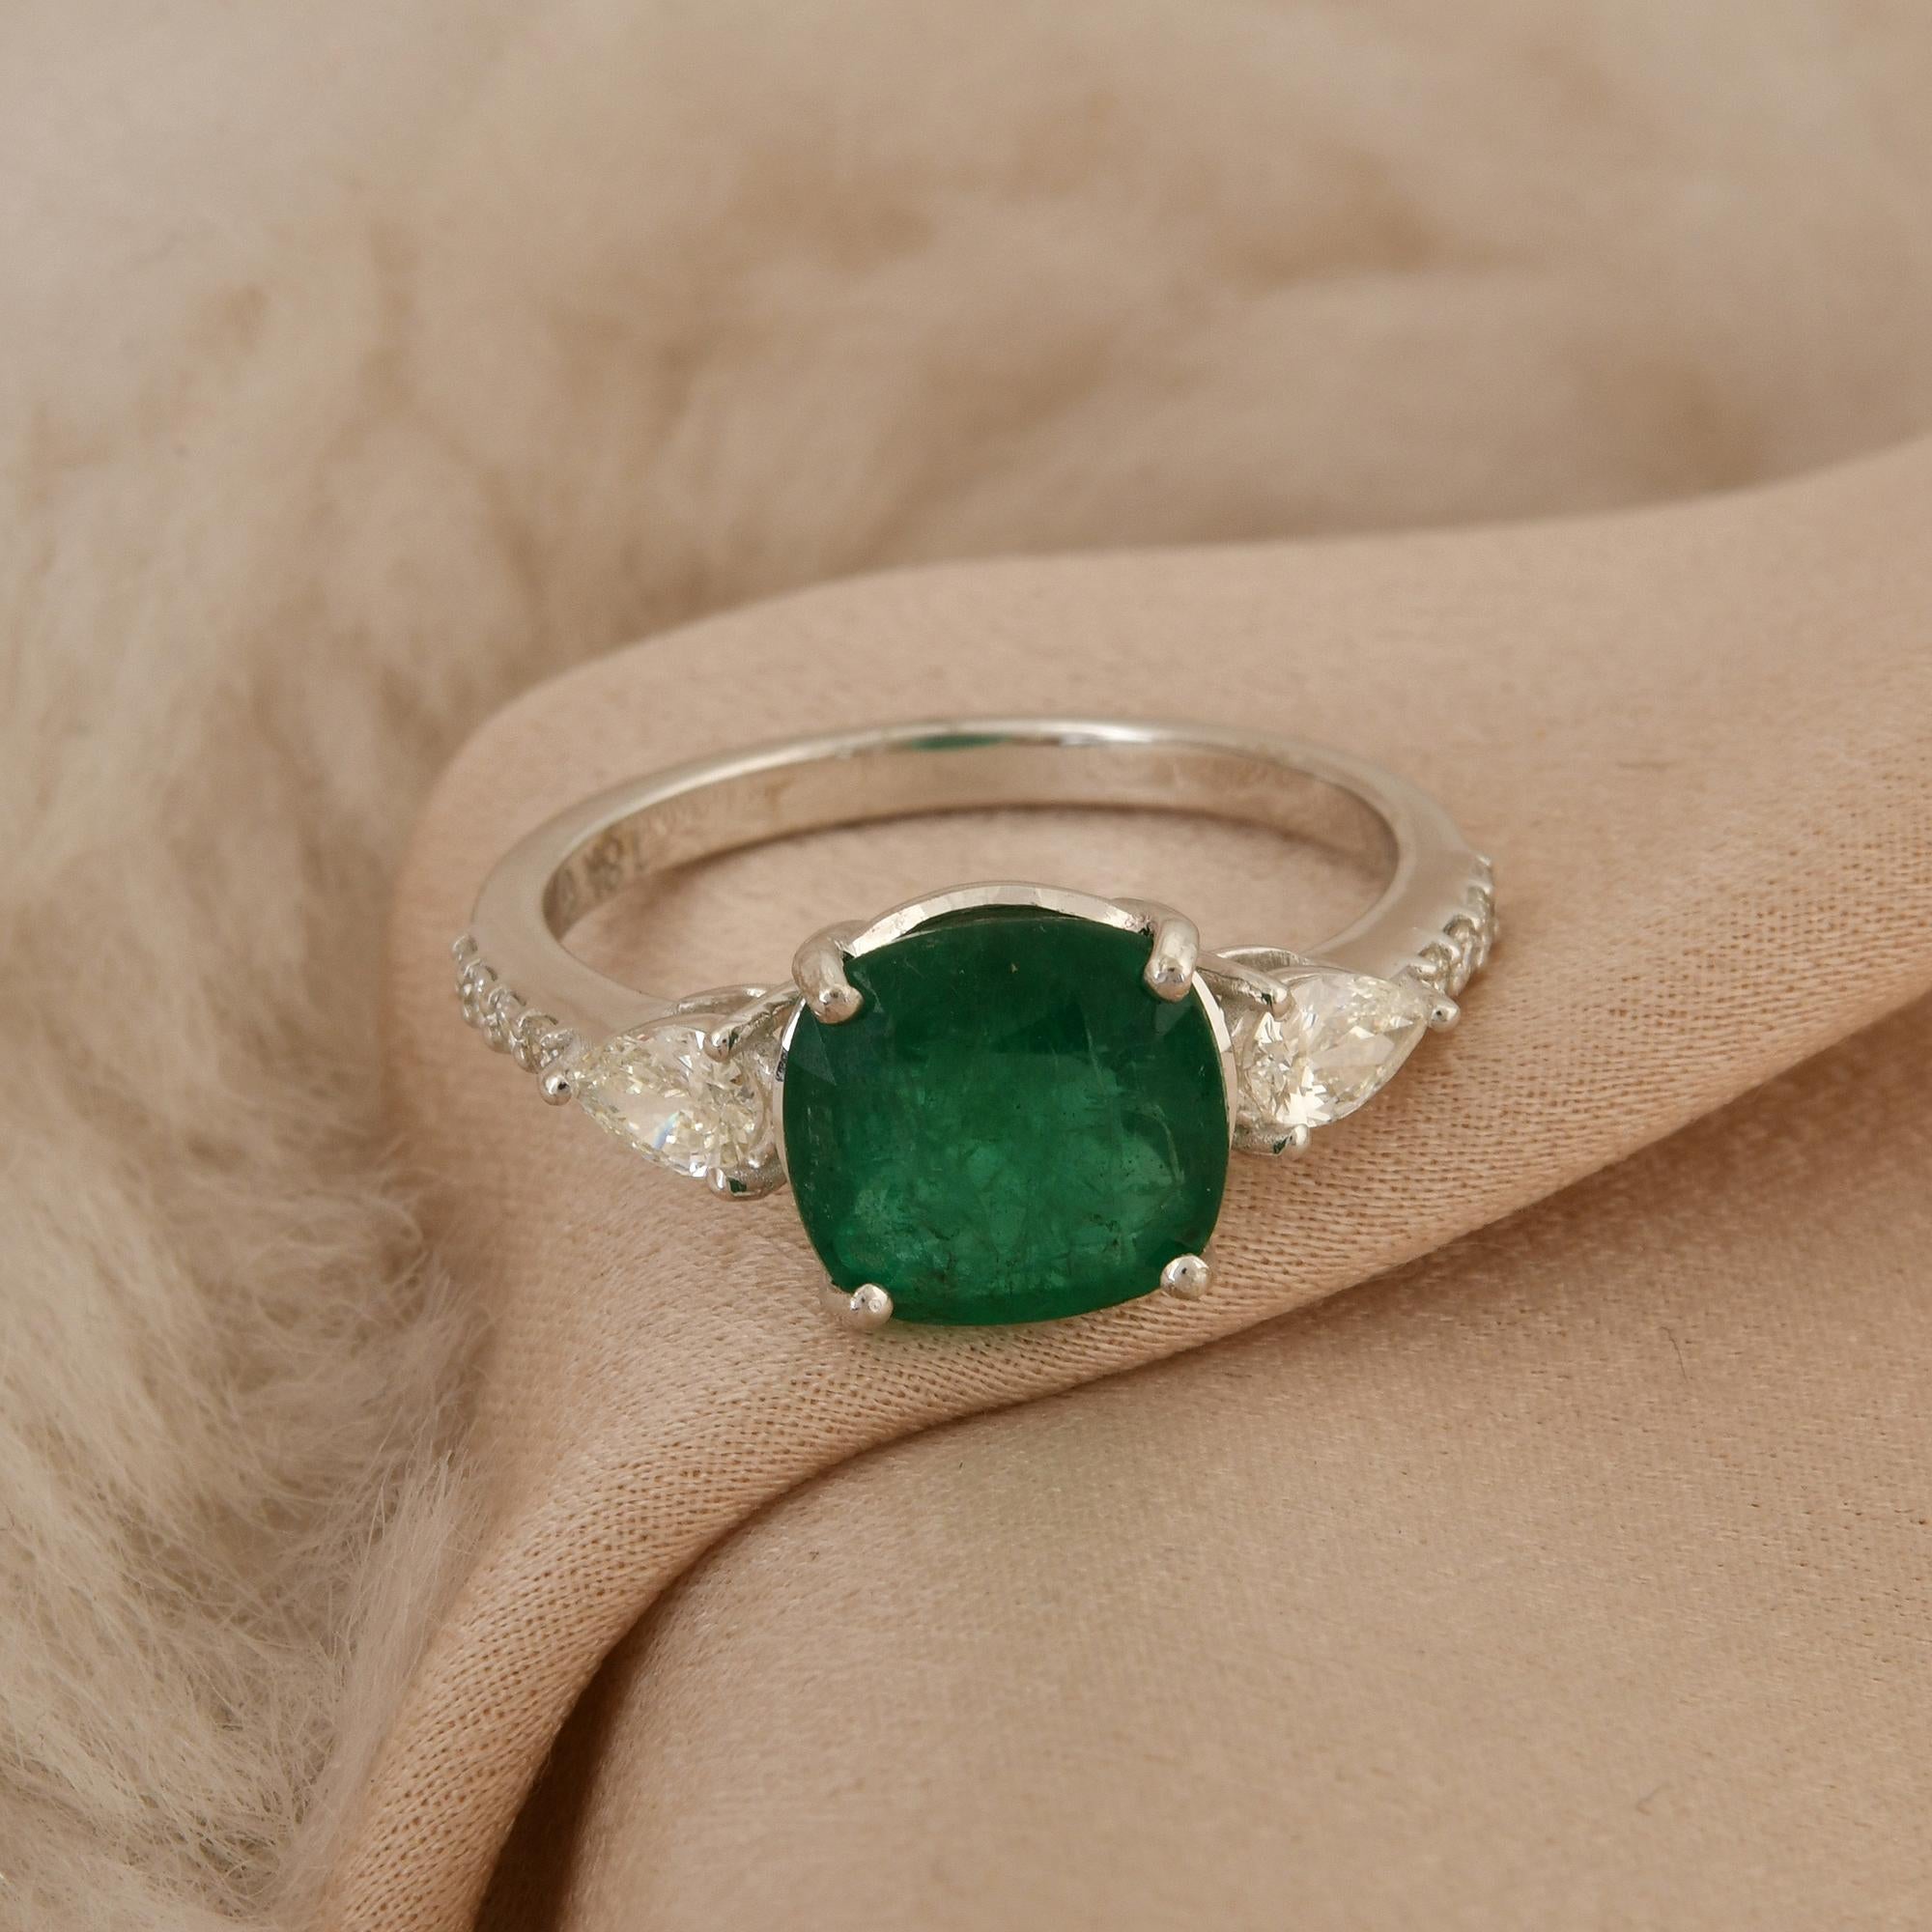 For Sale:  Natural Emerald Cocktail Ring Pear Diamond Solid 18k White Gold Handmade Jewelry 7